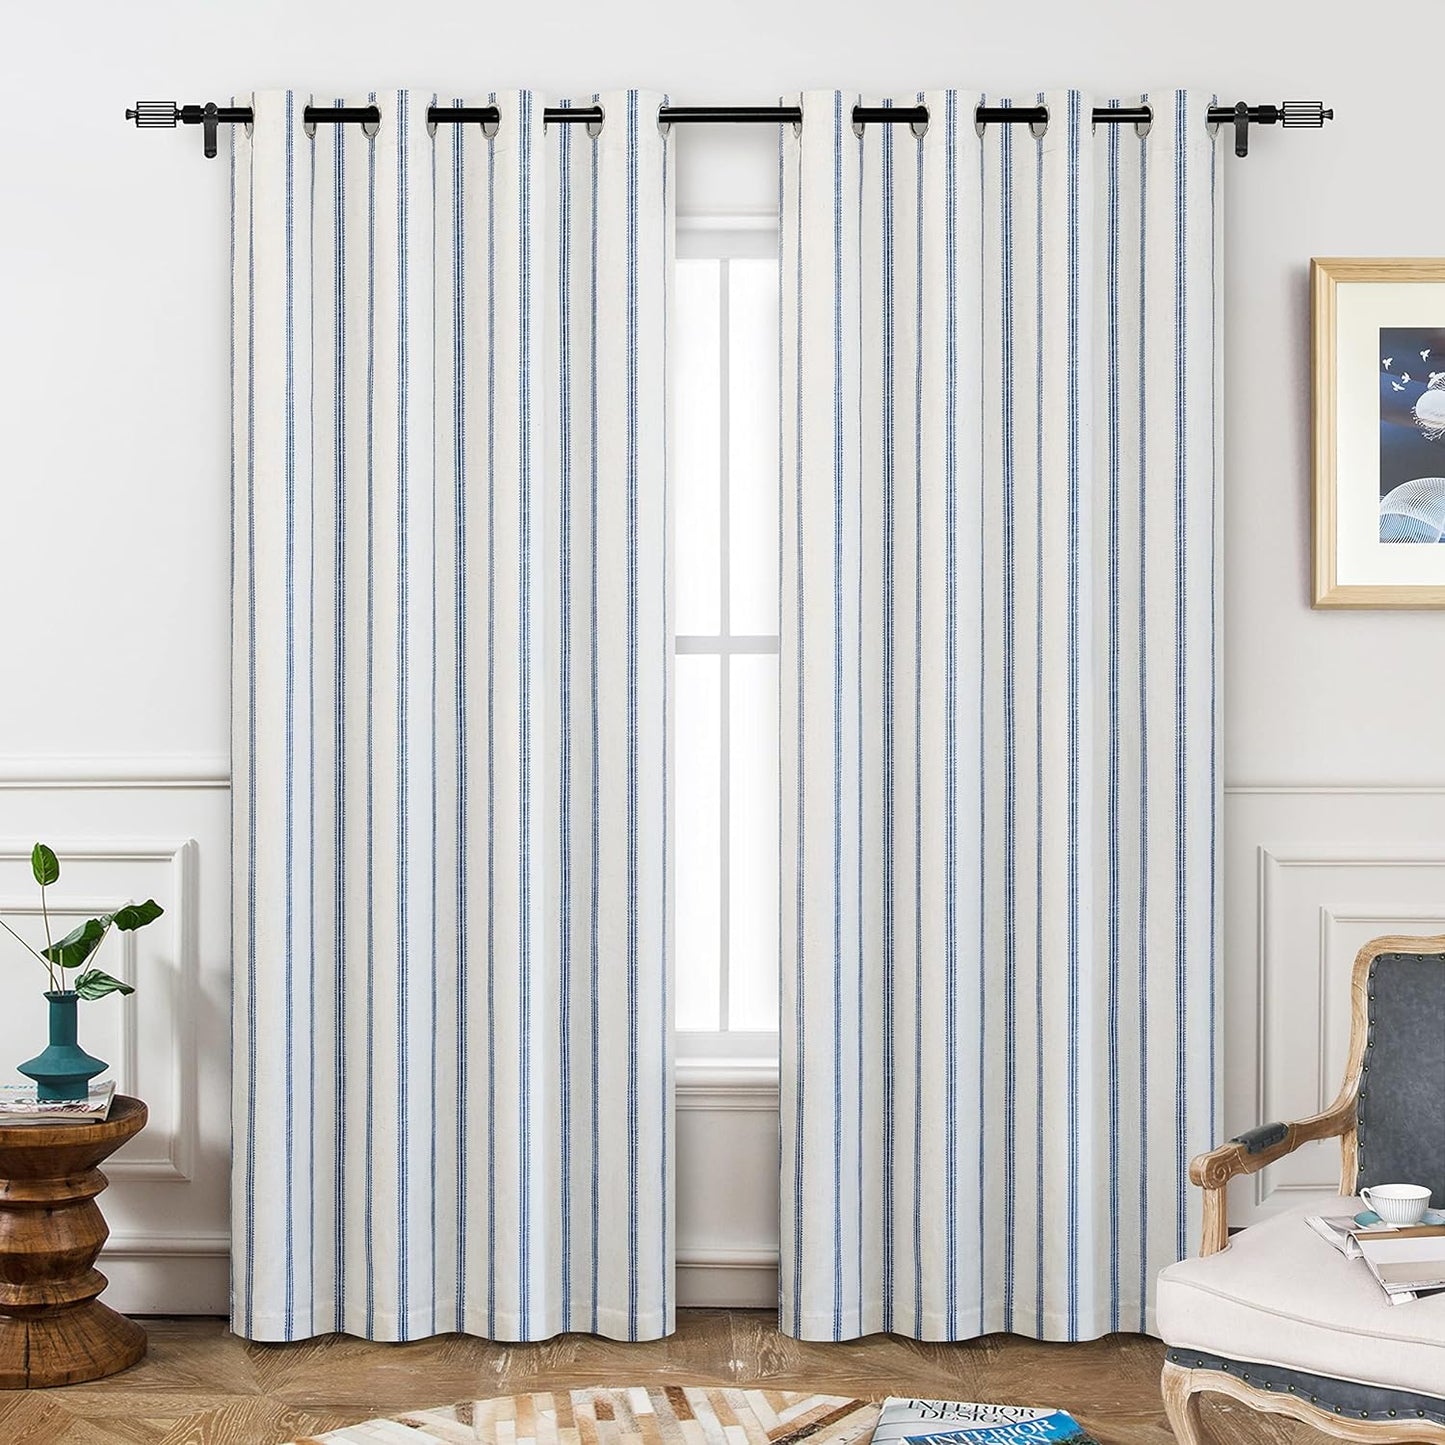 Driftaway Farmhouse Linen Blend Blackout Curtains 84 Inches Long for Bedroom Vertical Striped Printed Linen Curtains Thermal Insulated Grommet Lined Treatments for Living Room 2 Panels W52 X L84 Grey  DriftAway Navy 52"X84" 